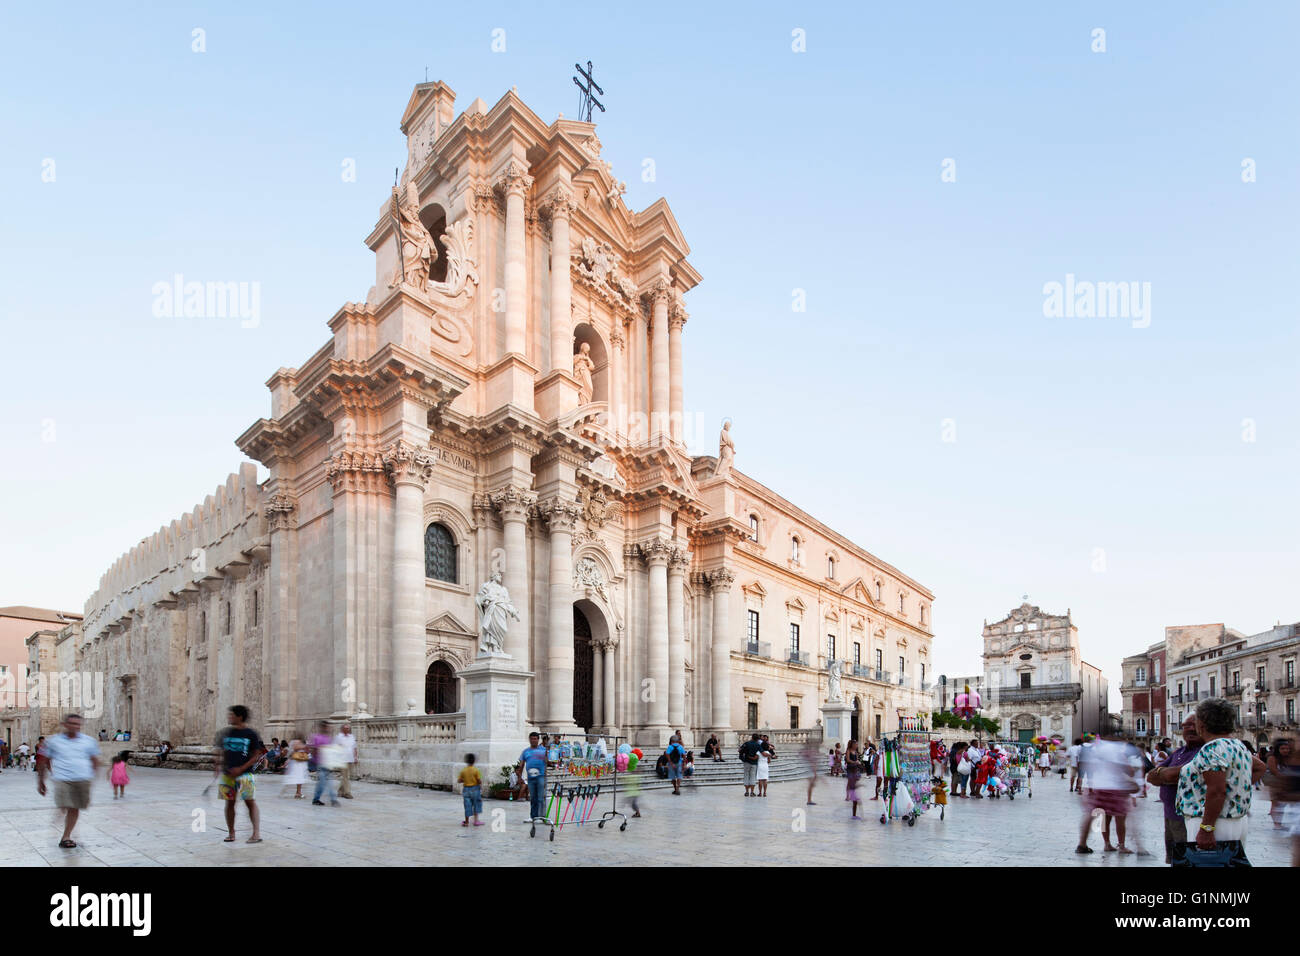 Evening atmosphere at the Piazza Duomo of Siracusa Stock Photo